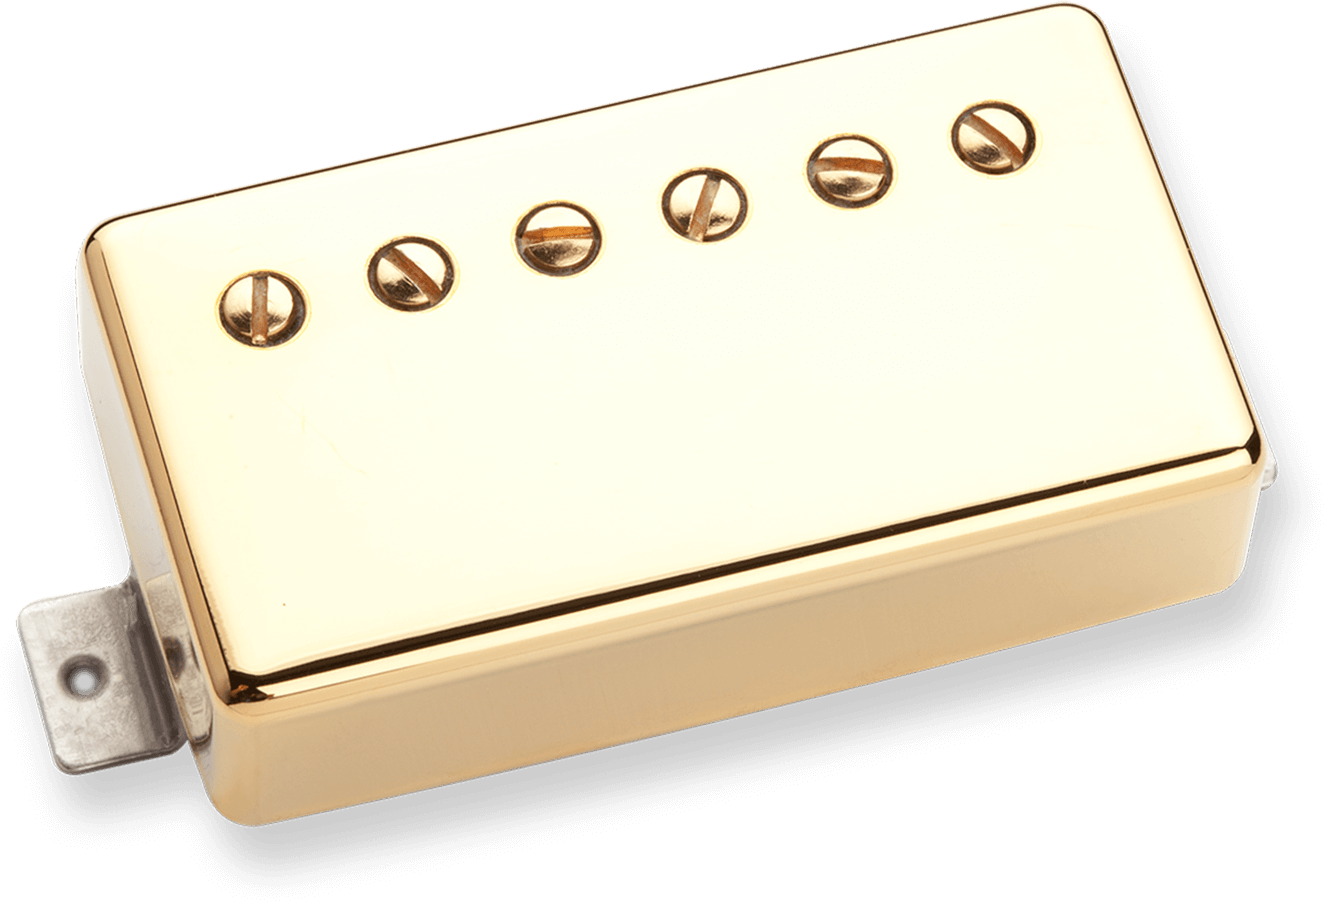 Seymour Duncan Aph-1n Alnico Ii Pro Hb - Neck - Gold - Electric guitar pickup - Main picture